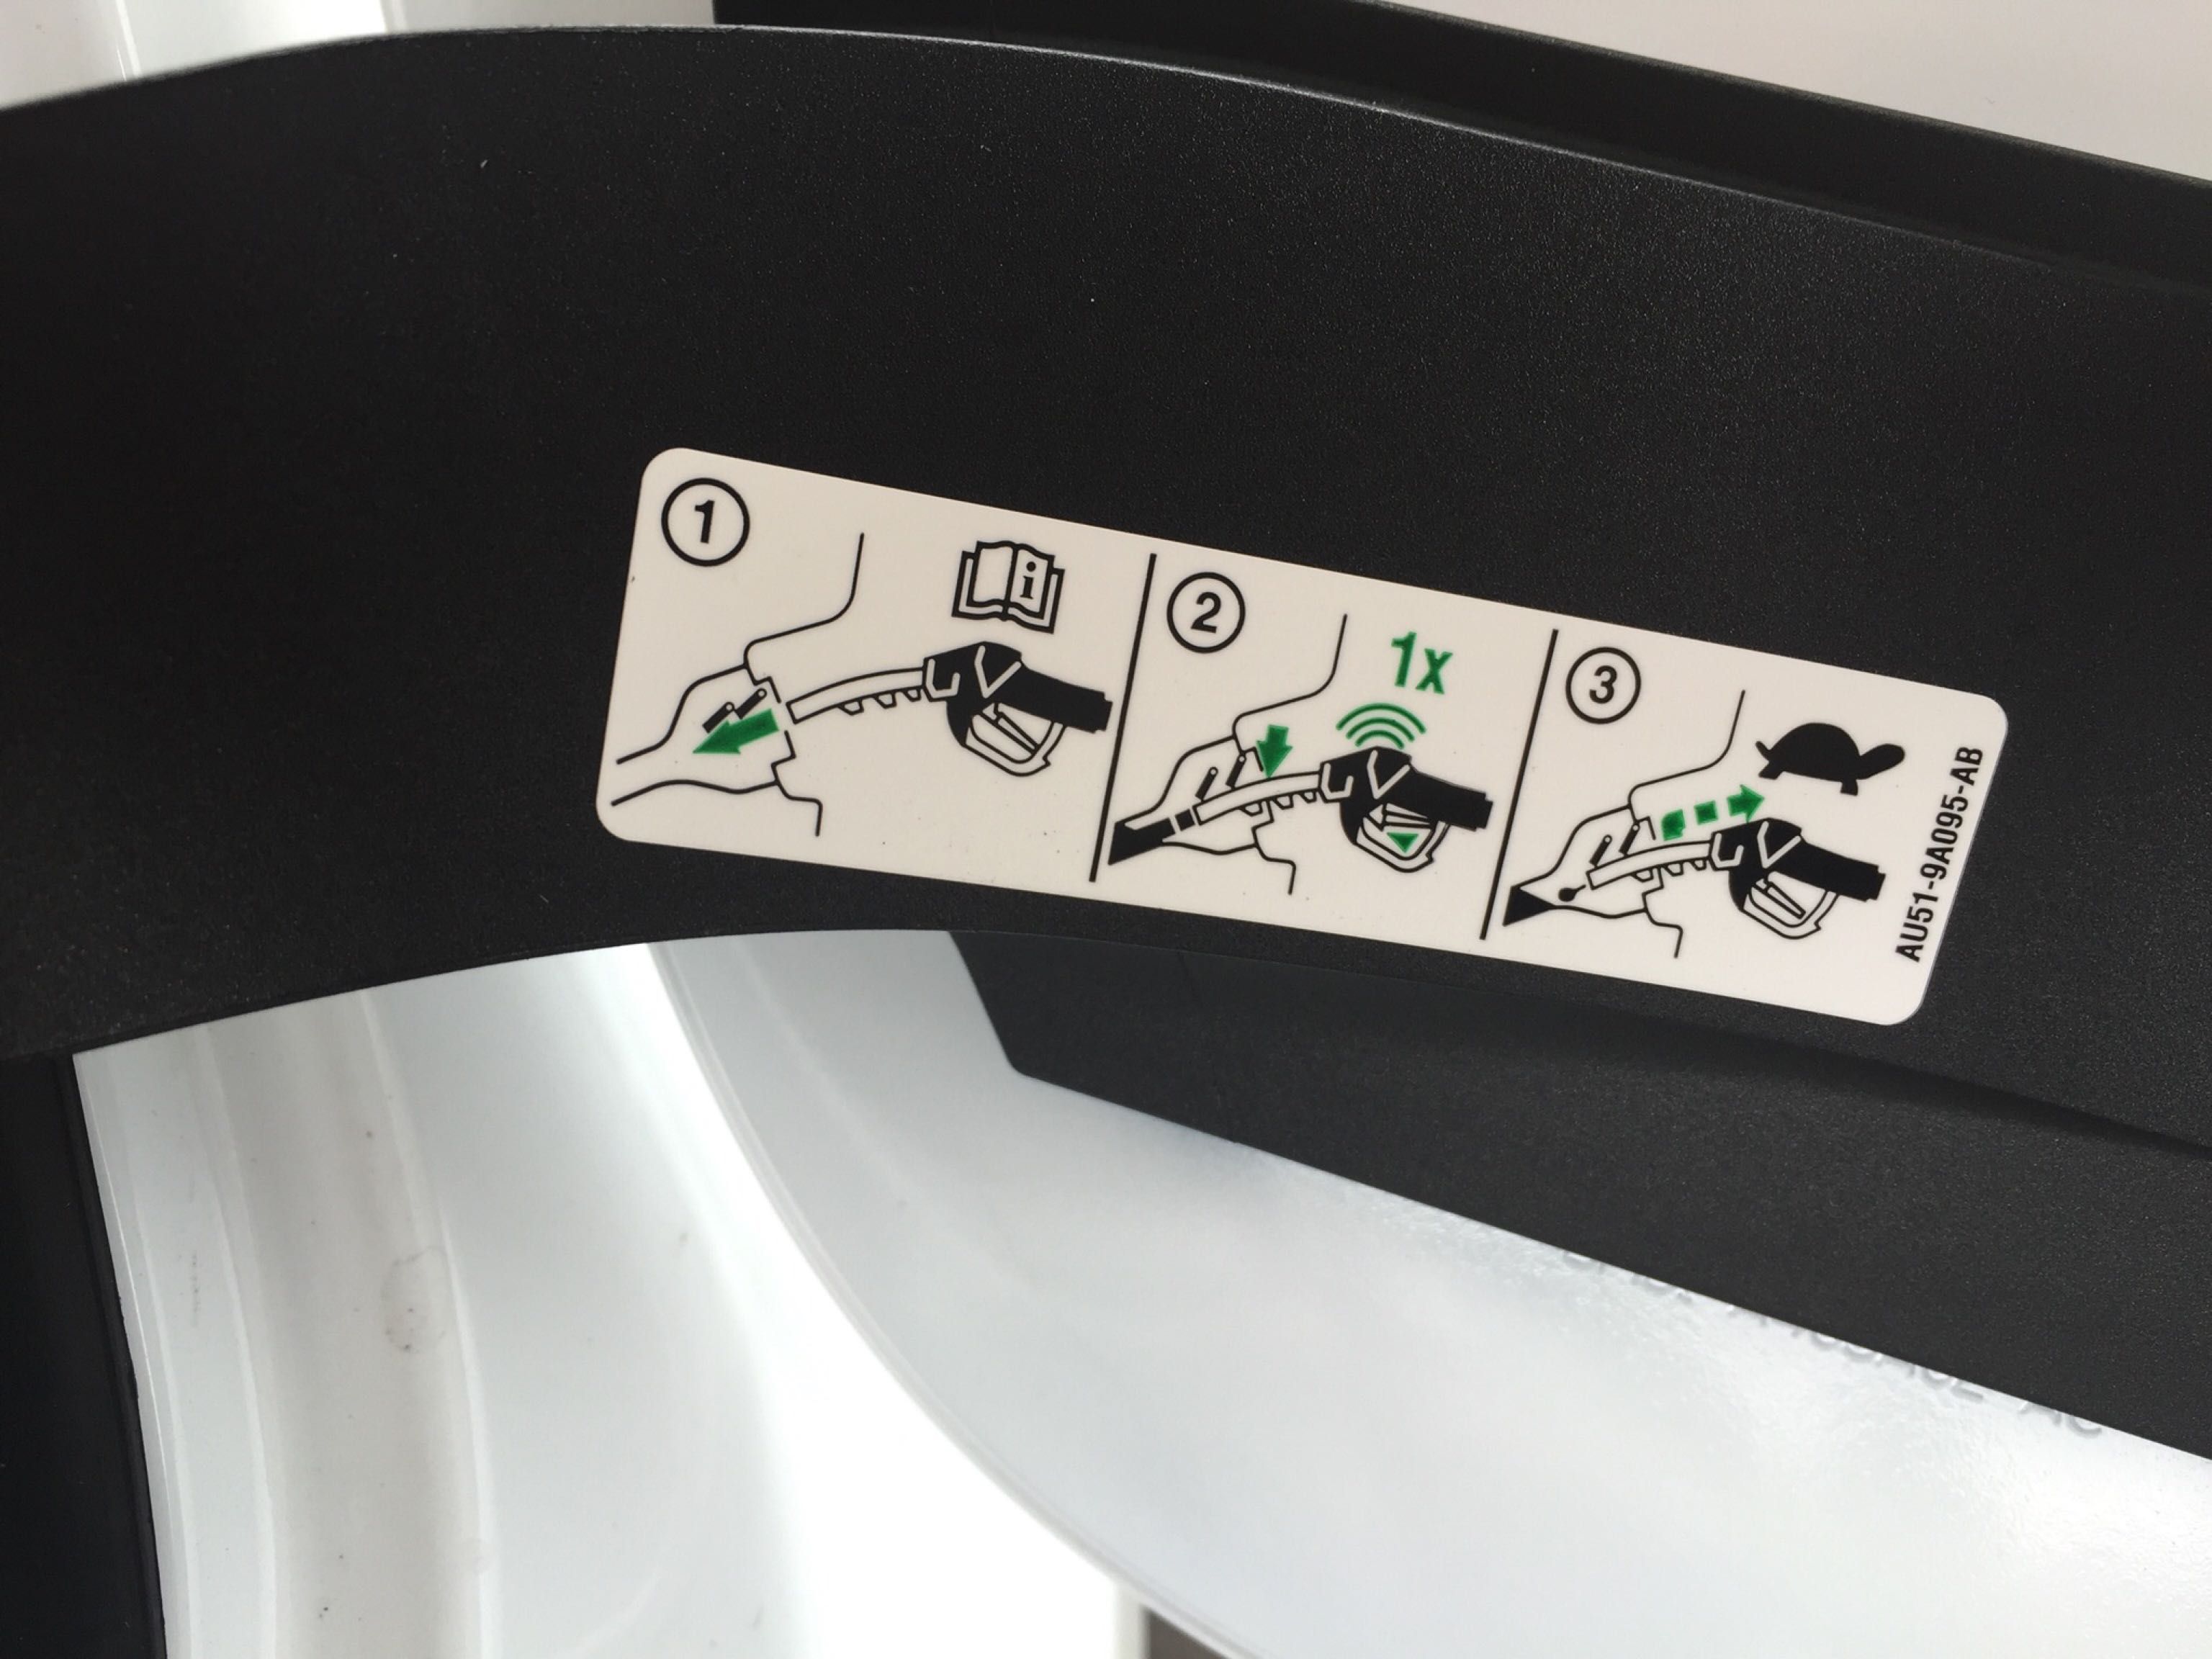 Found on my rental car - 1. Get gas 2. Shake once 3. Receive turtle